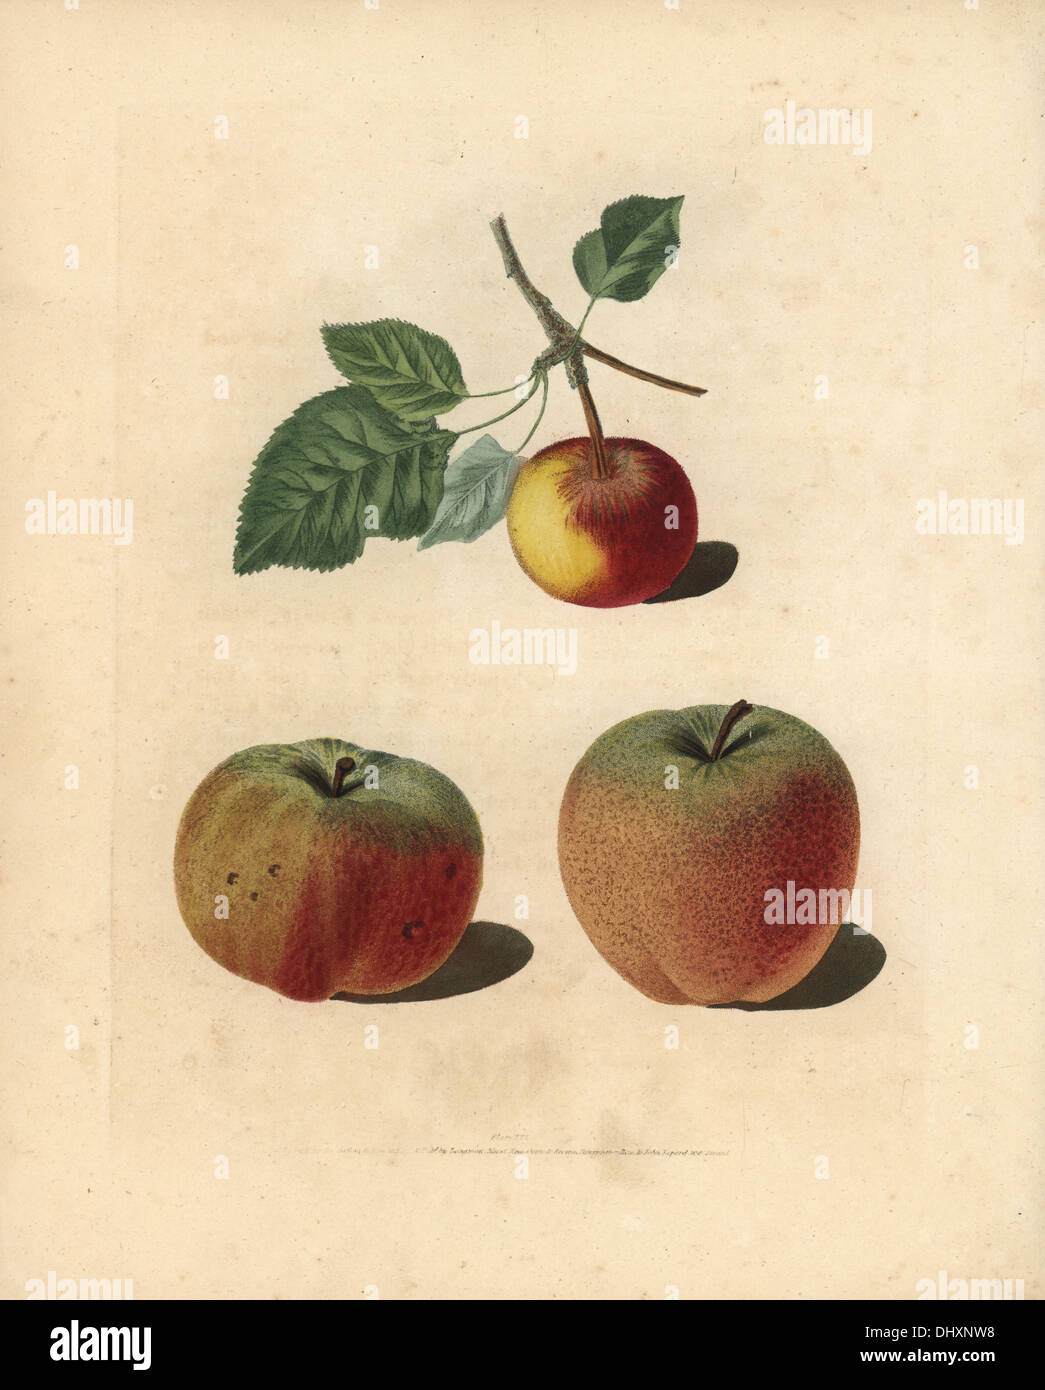 Apple varieties, Malus domestica: Pomme d'Api, Padly's Pippin and Bigg's Nonsuch. Stock Photo